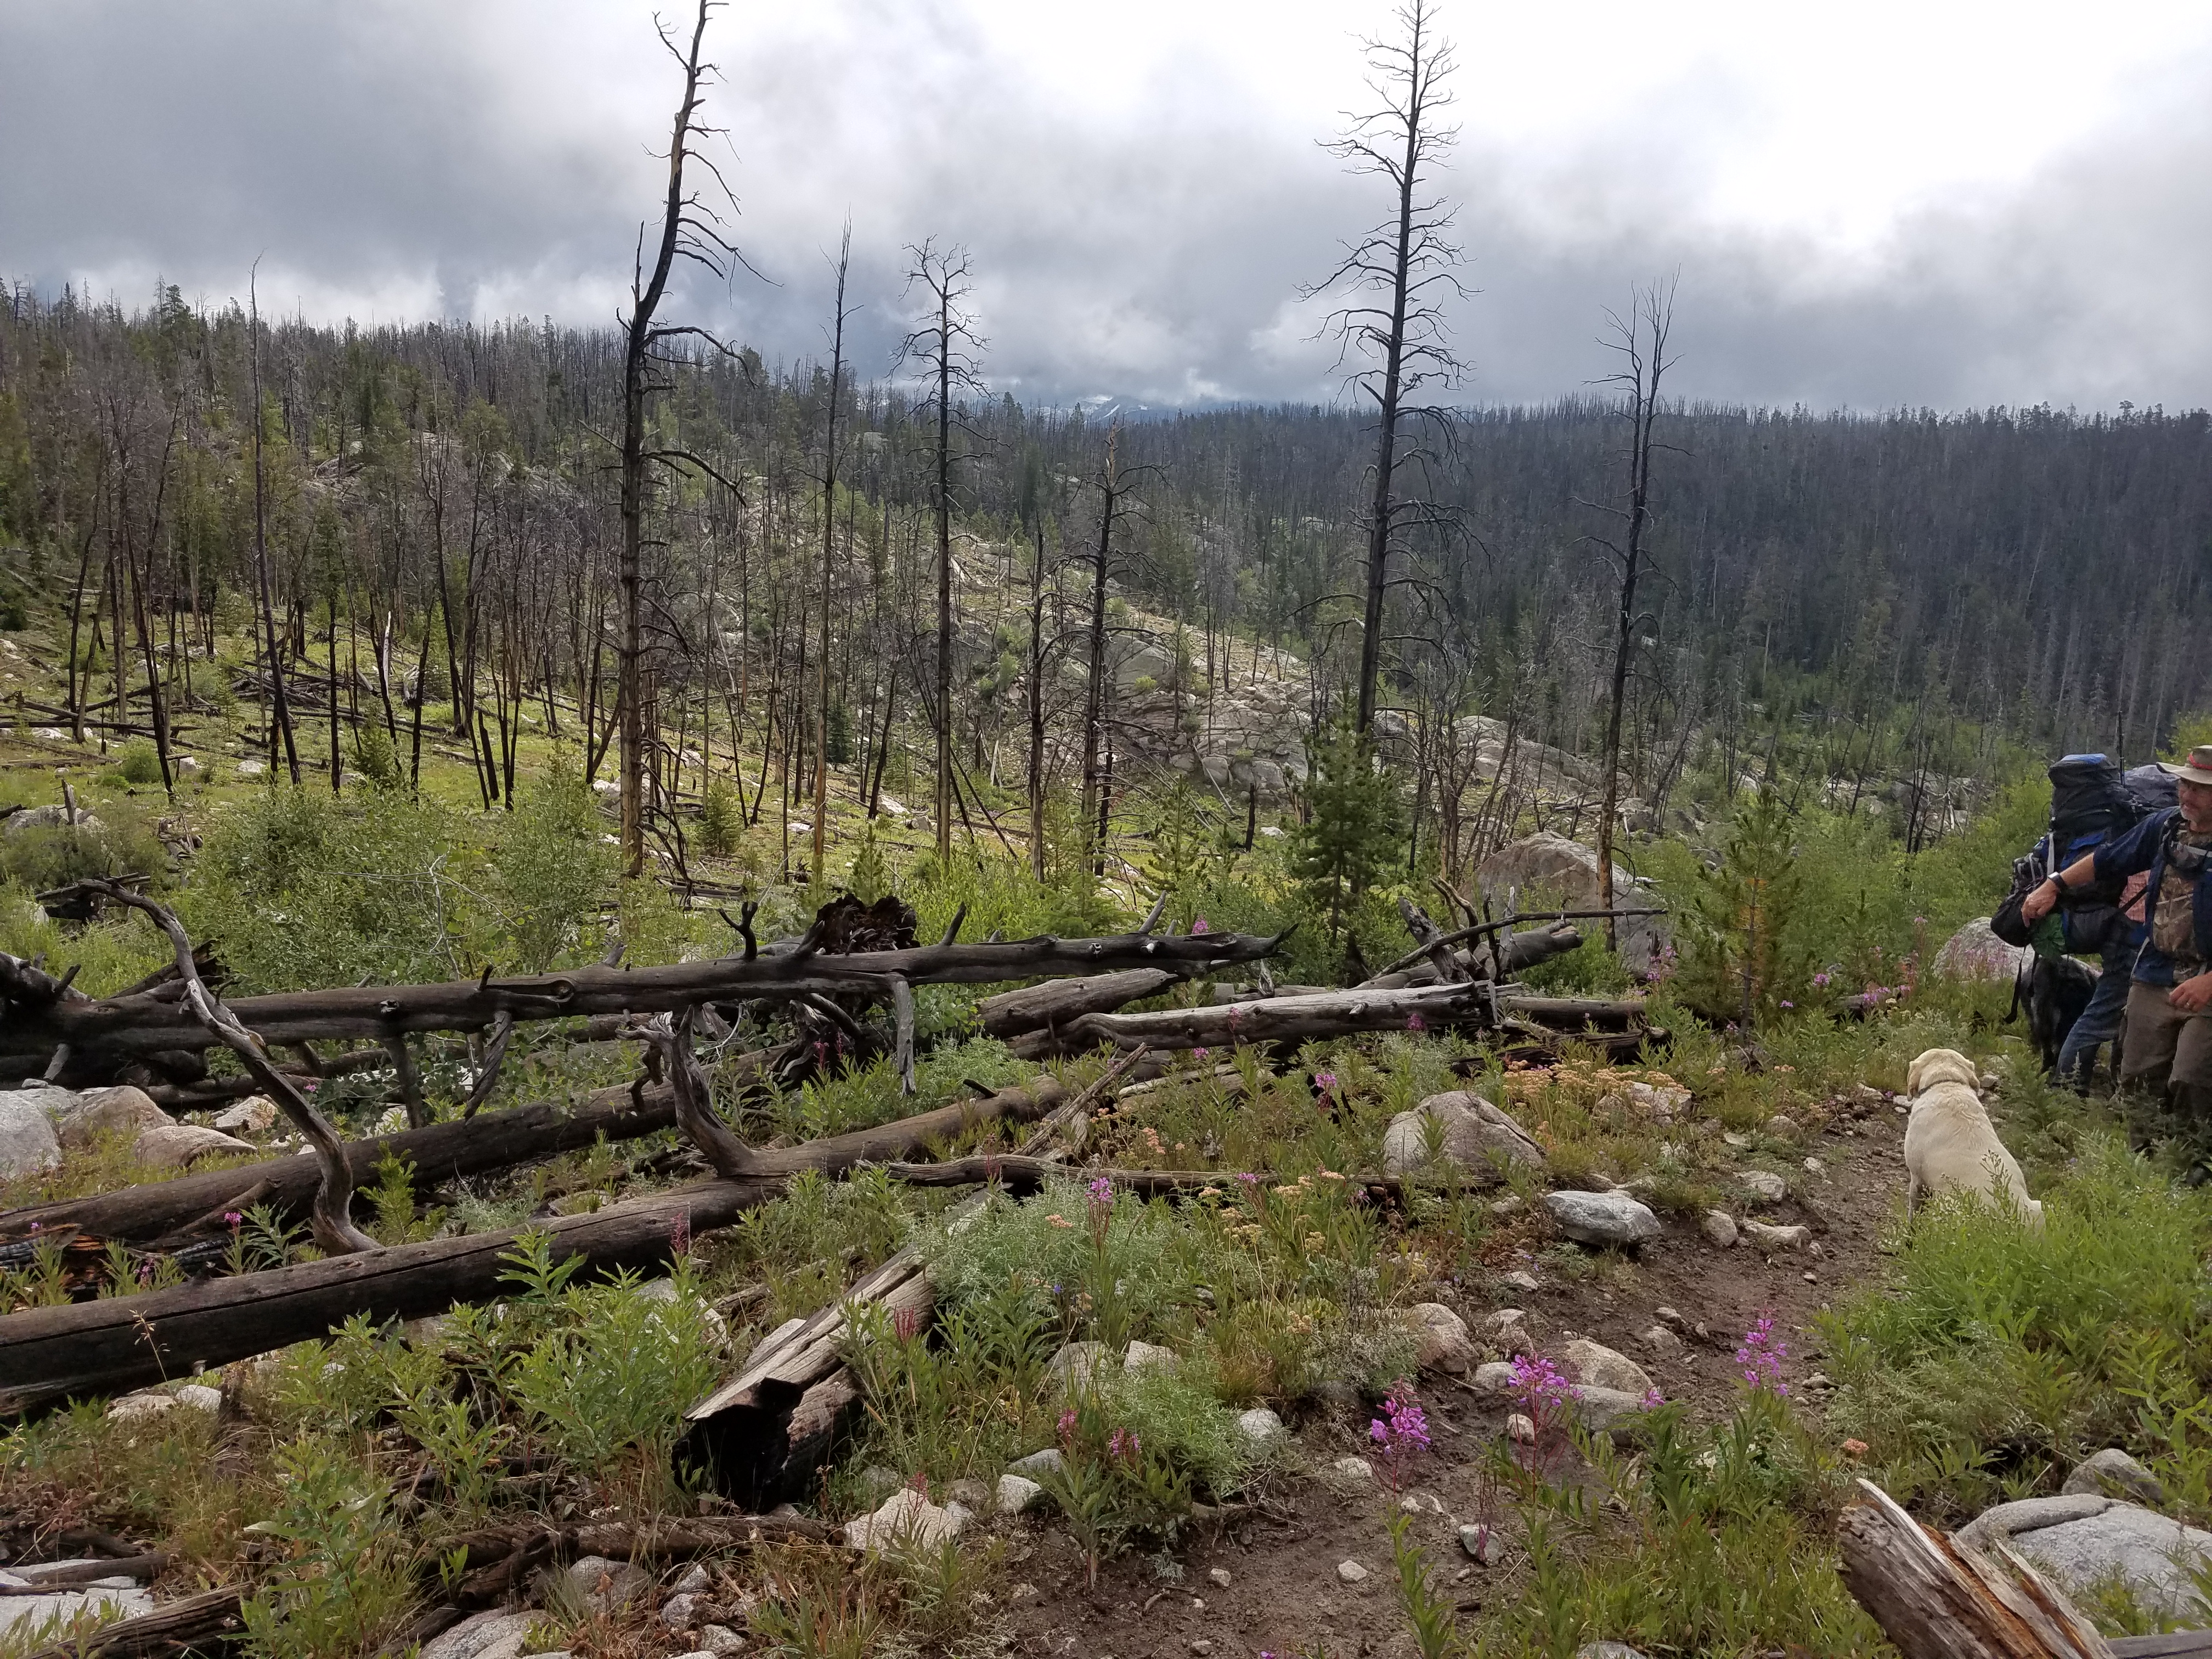 2017 Wind River Trip - Day 8 - Coyote Lake to Boulder Lake, Ethan's Exploding Pillow, Grizzly Bear Challenge, Dead Car Battery & Broken Key, Wind River Brewing Company, Toilet (Wind River Range, Wyoming)